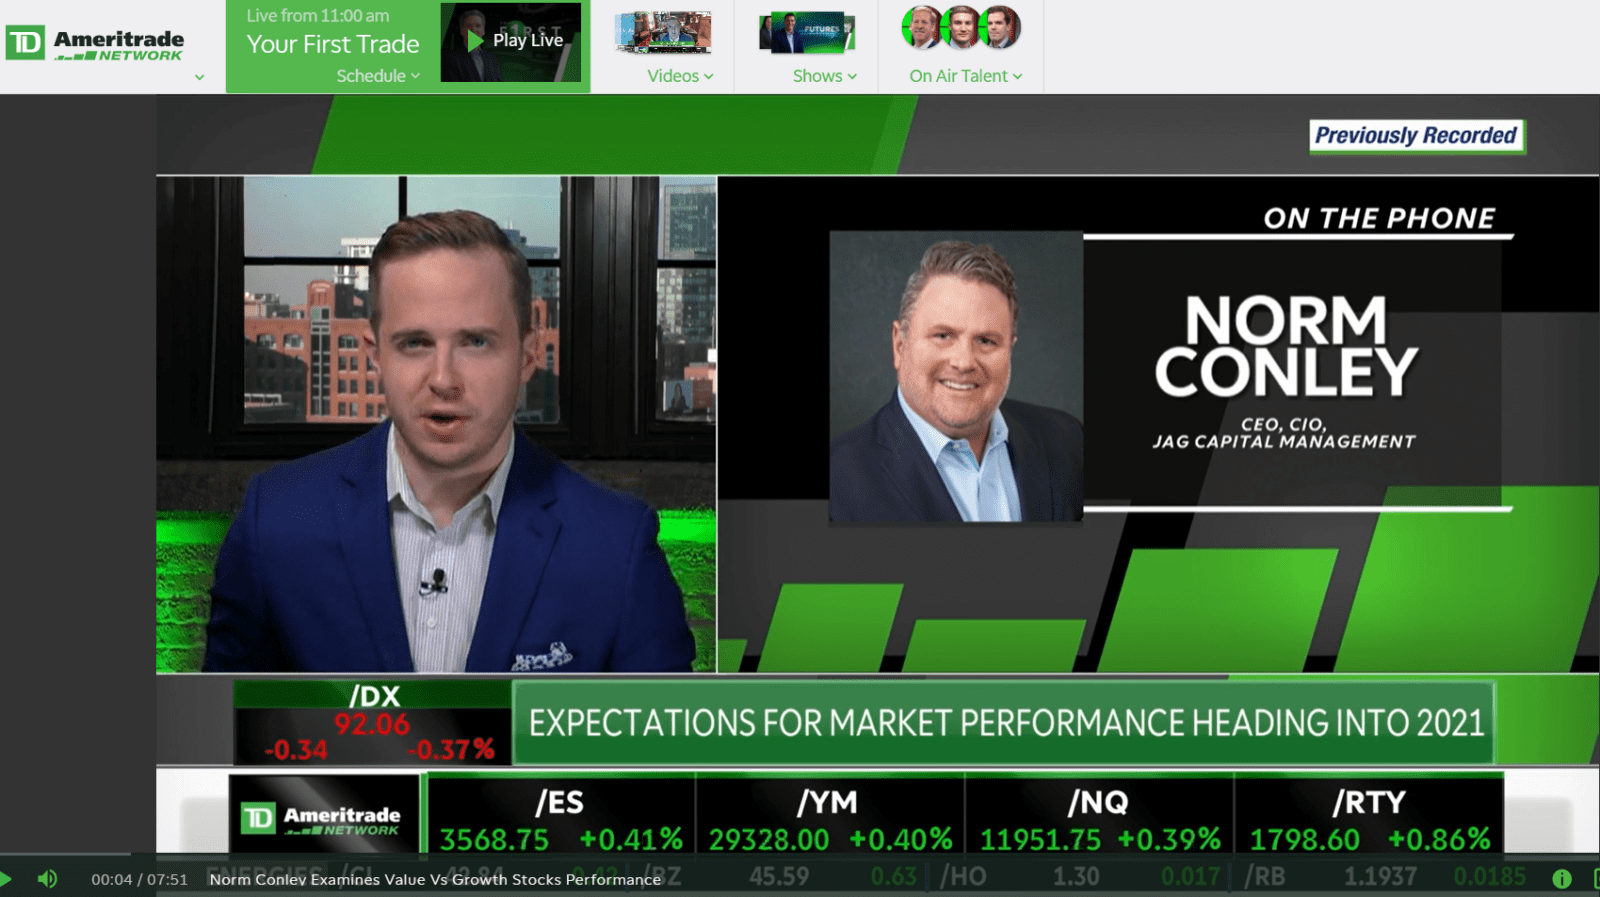 TDAmeritrade “Morning Trade Live” Expectations for Market Performance Heading into 2021